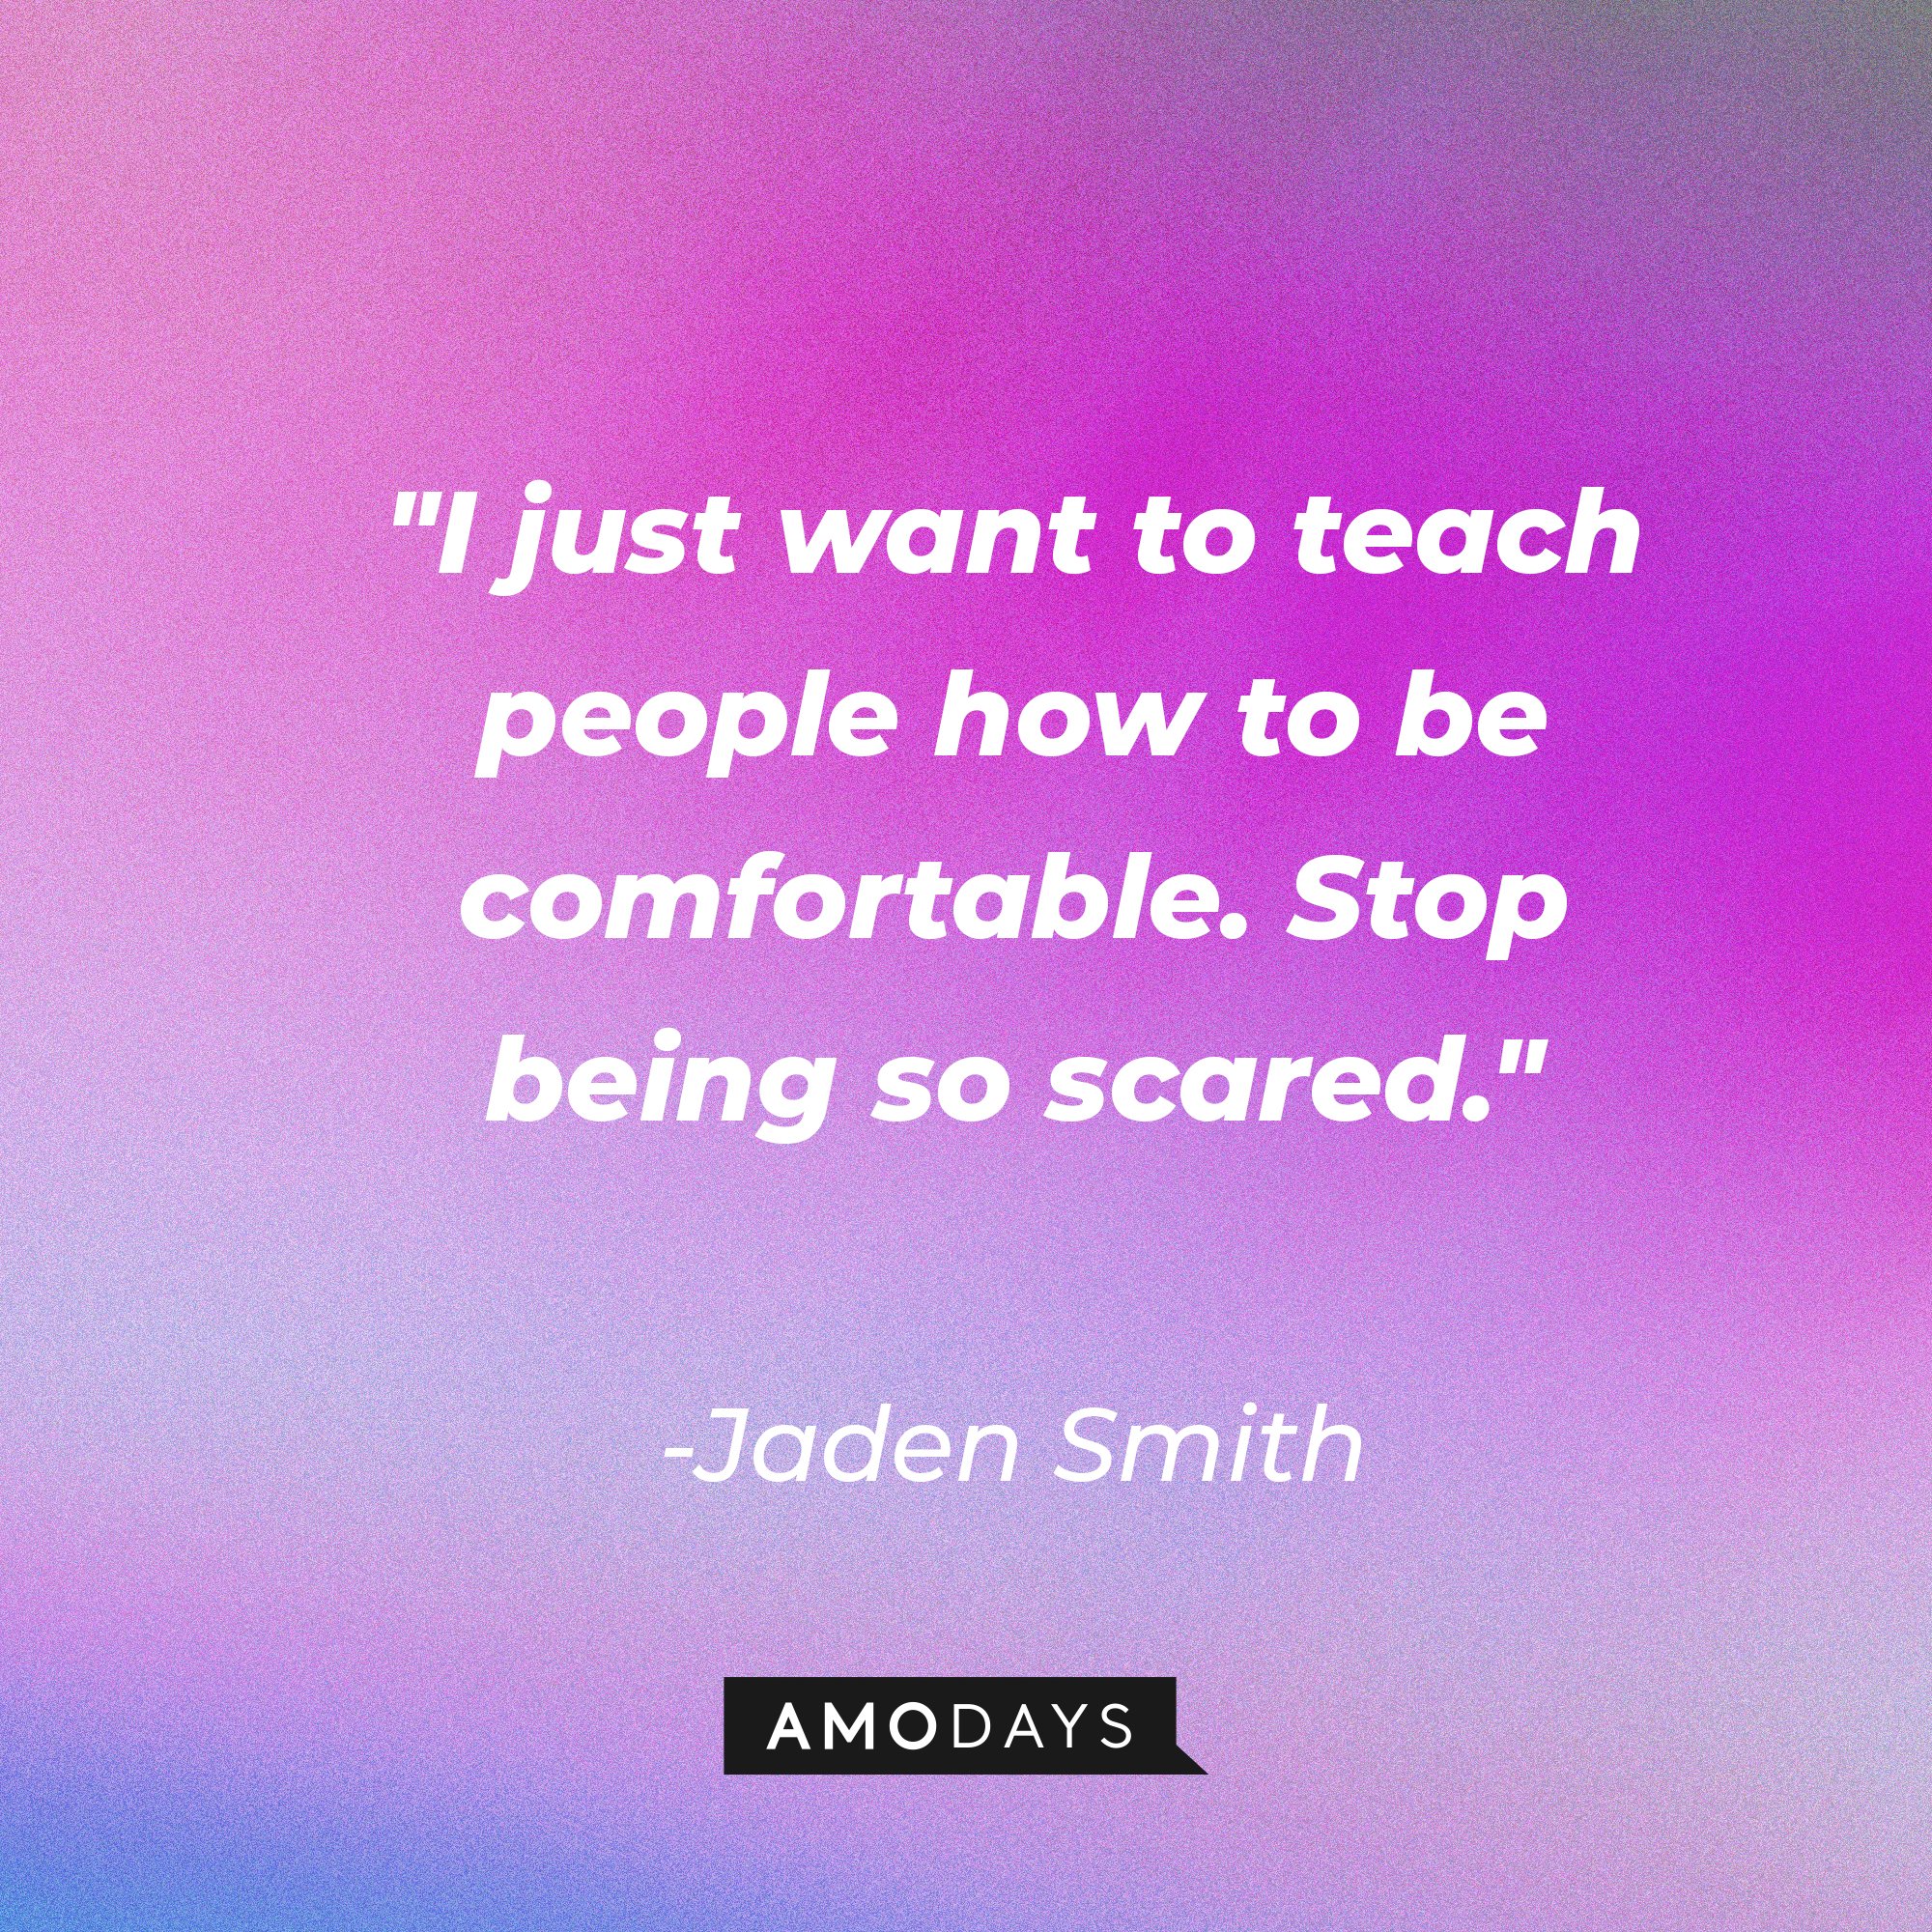 Jaden Smith's quote: "I just want to teach people how to be comfortable. Stop being so scared." | Image: AmoDay